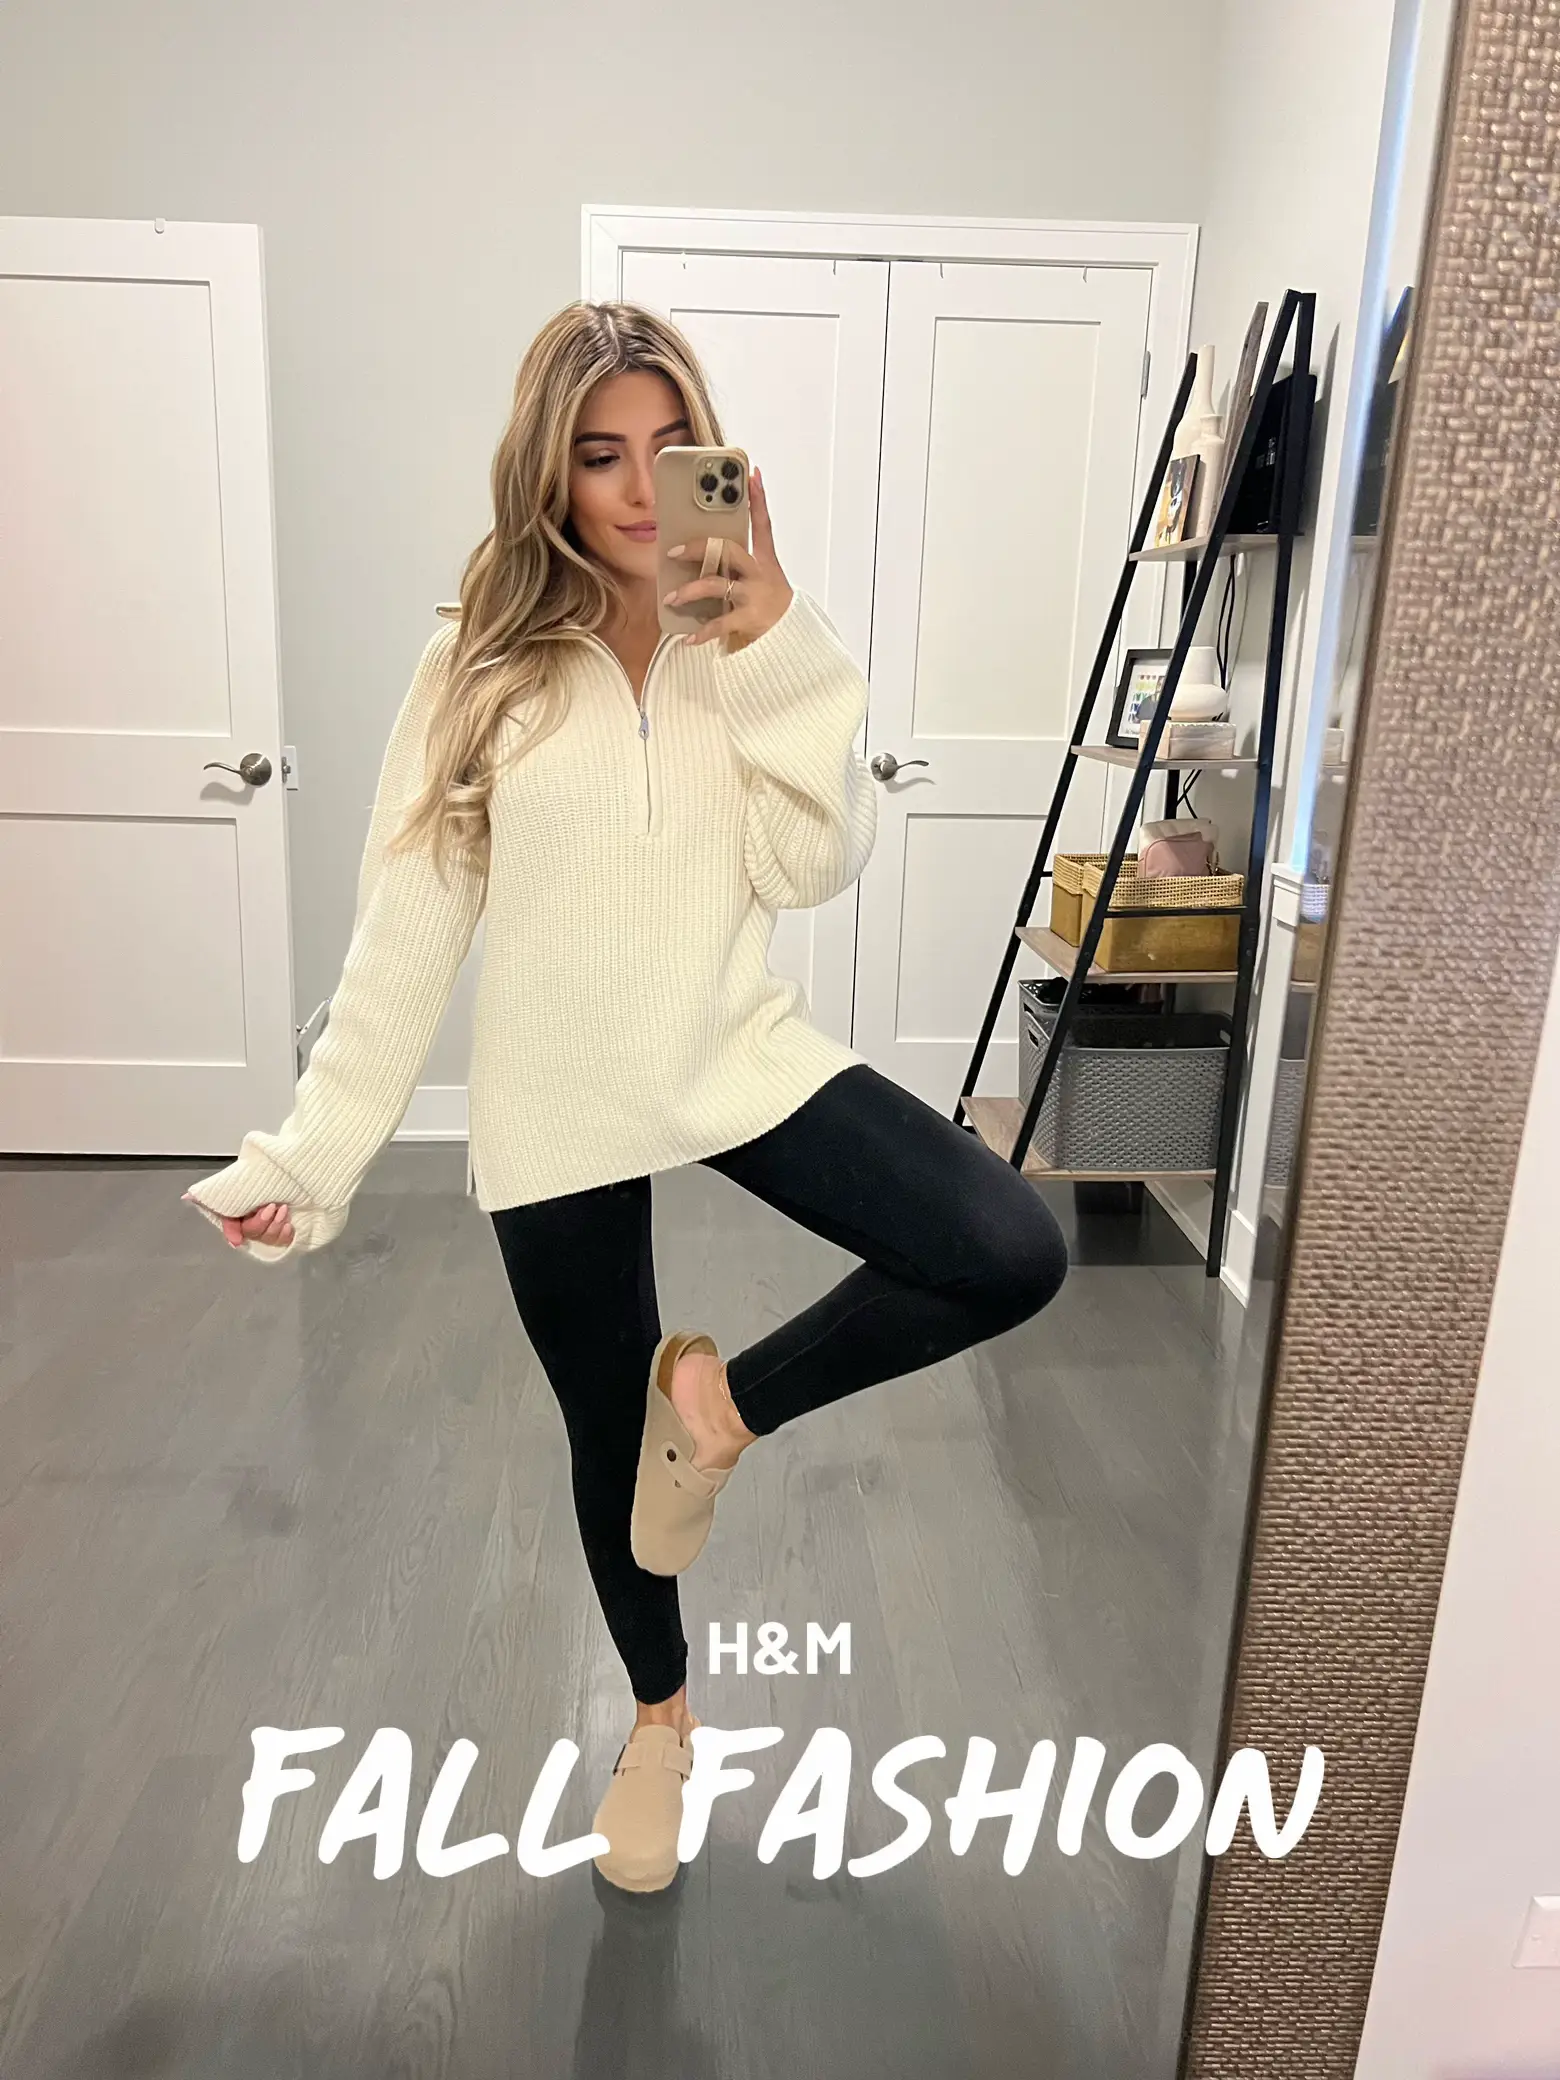 I'm 5'5 and 155 lbs and did a fall Aerie haul - the flared